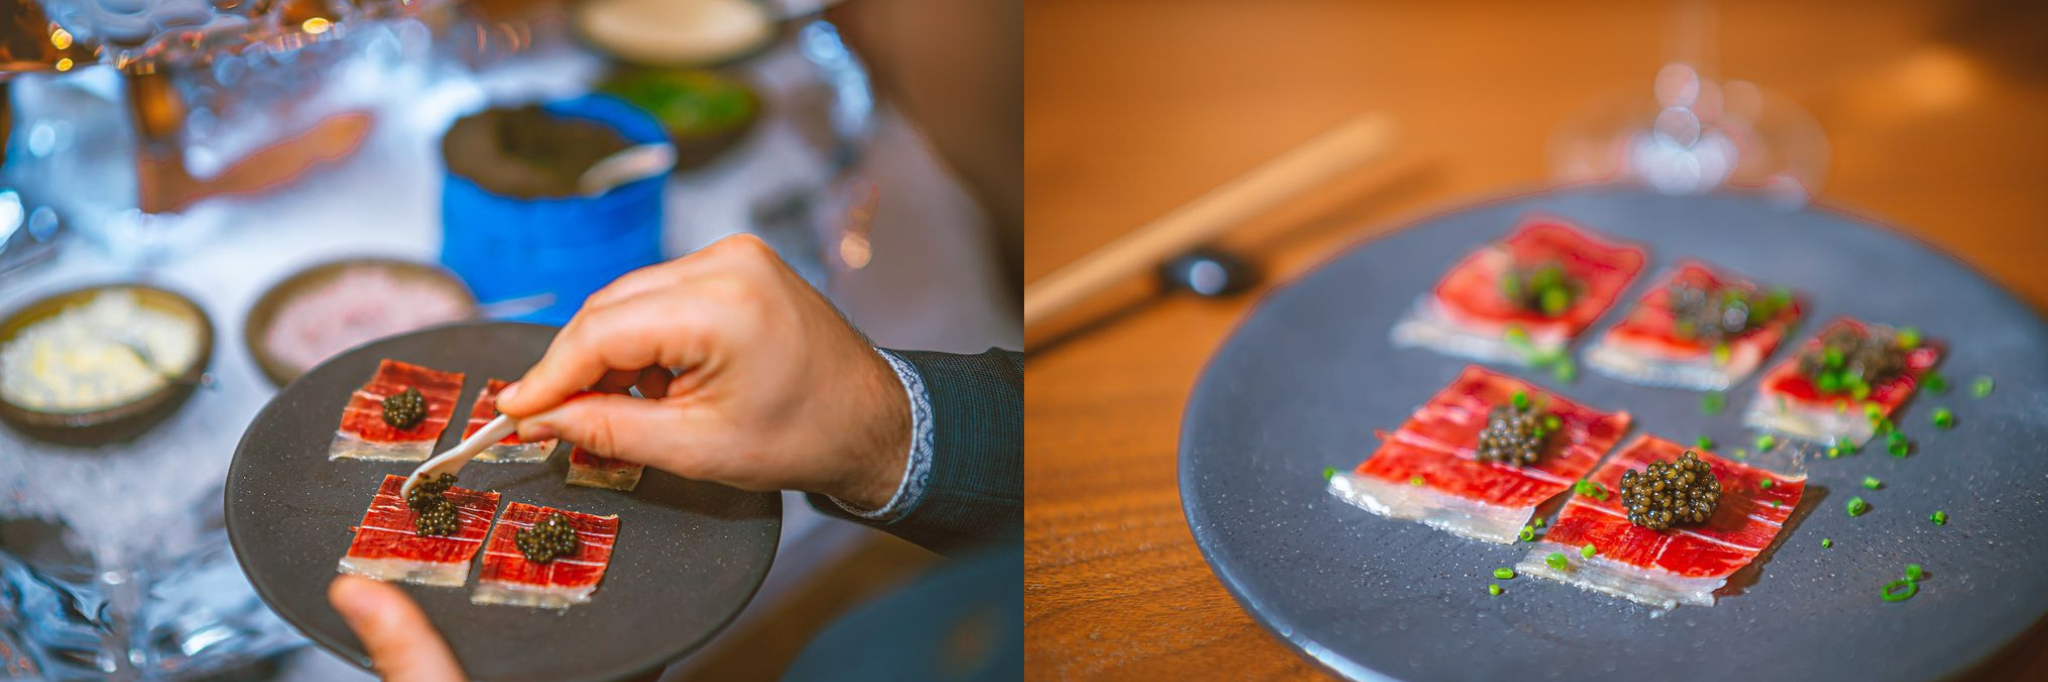 Putting caviar on top of a dish using pearl spoon